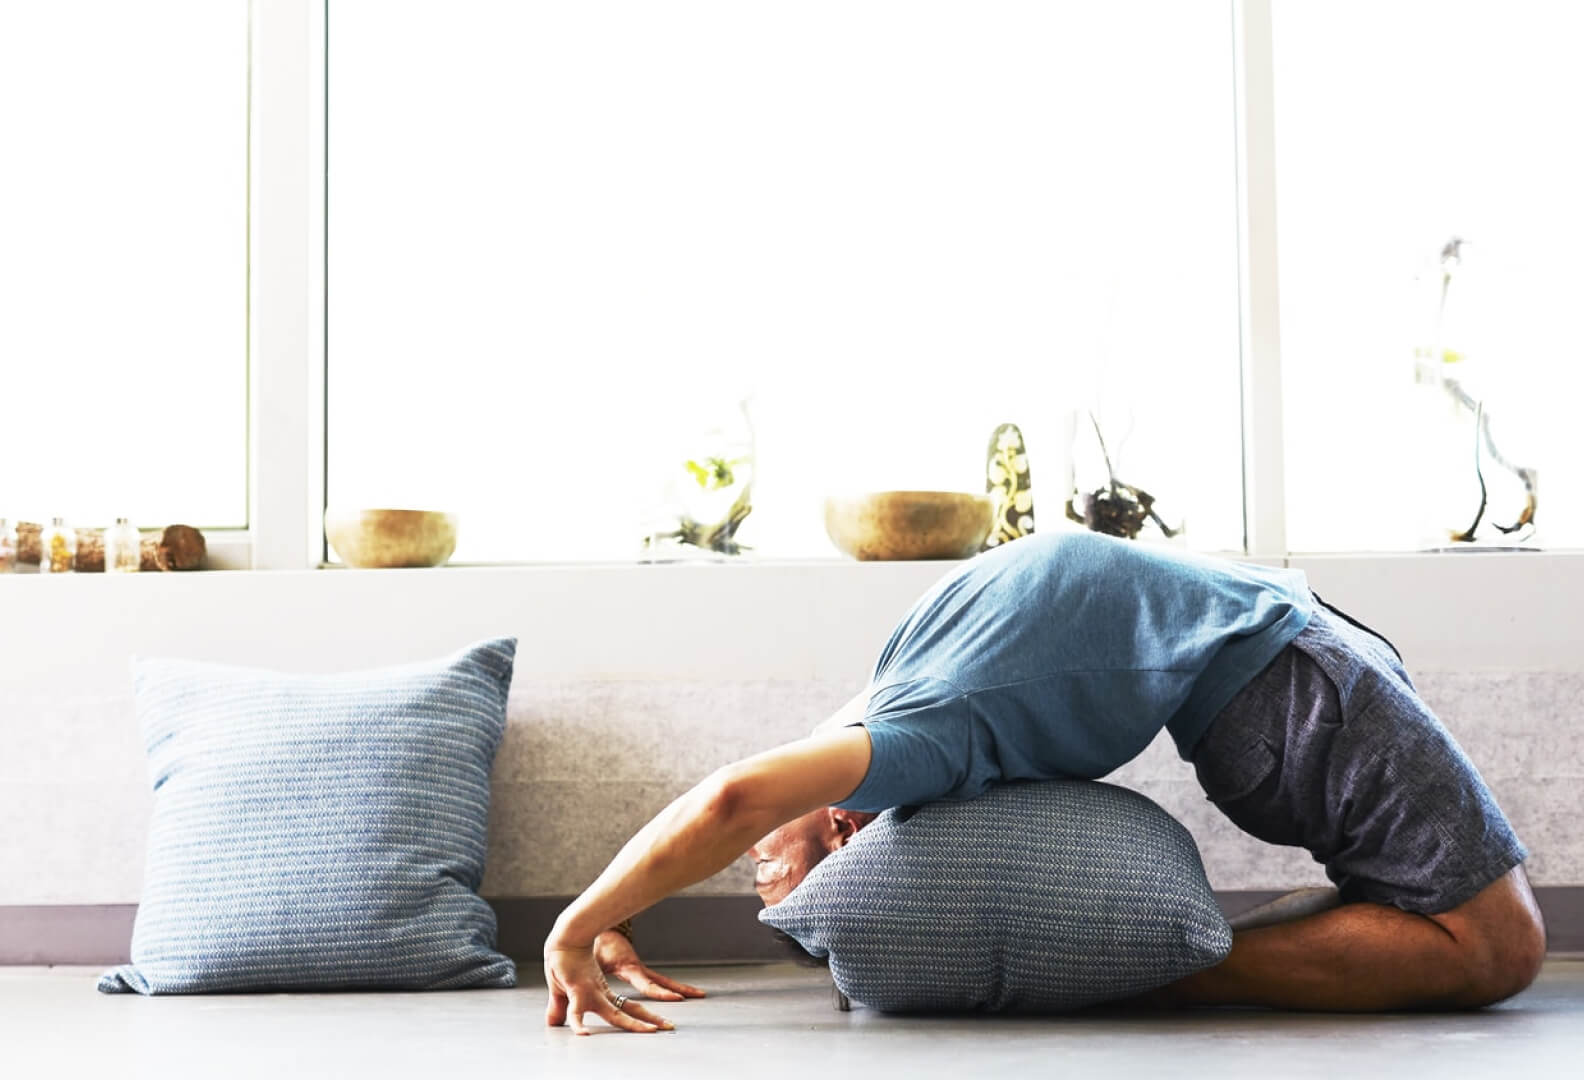 A man stretches back deeply onto a pillow.